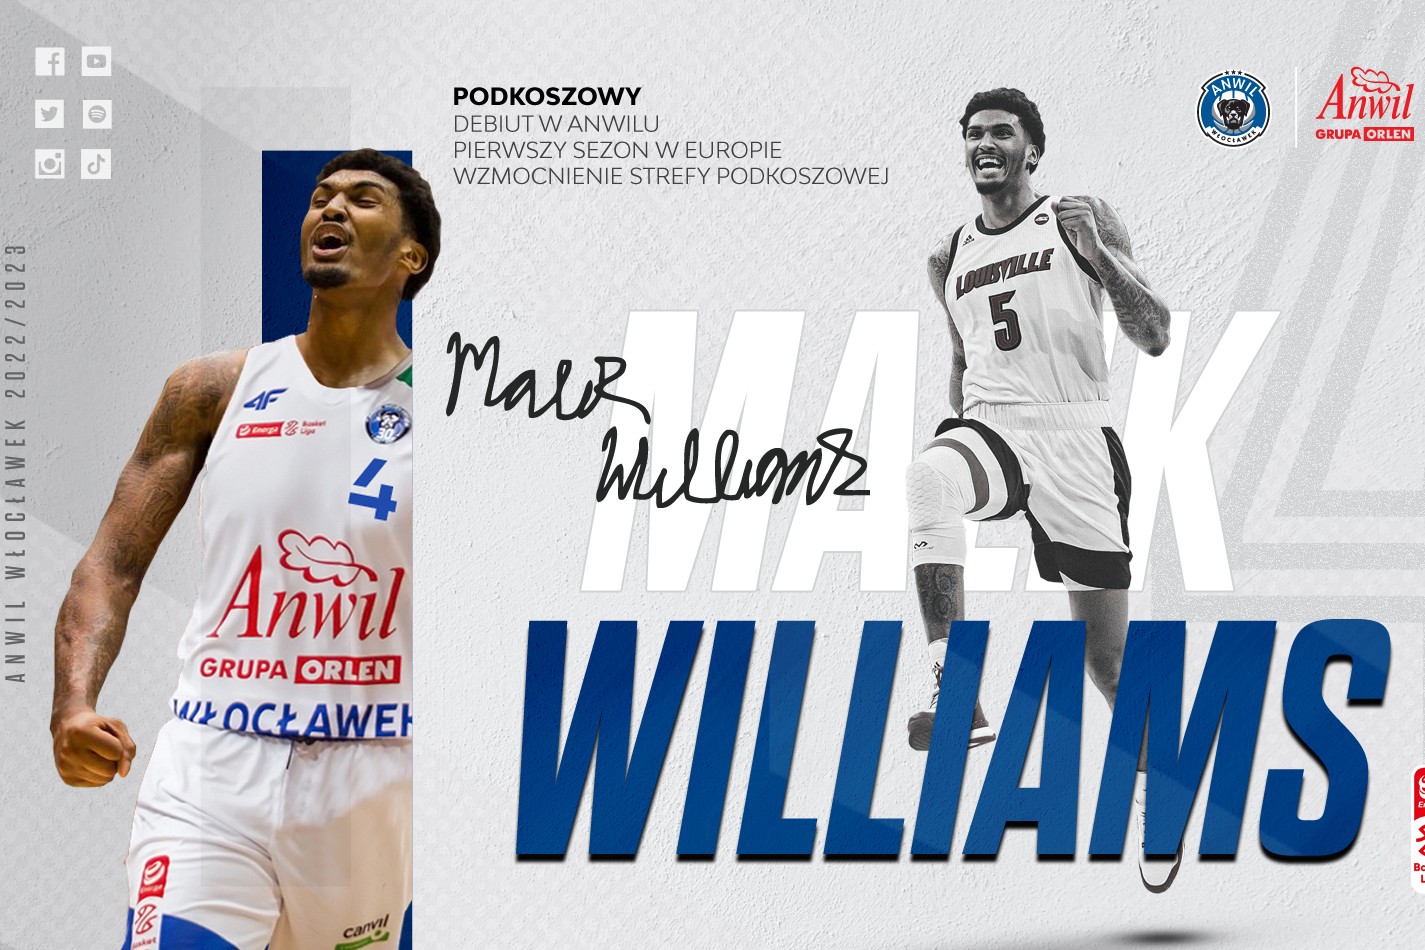 New Year's Gift - Malik Williams Joins Anwil! 